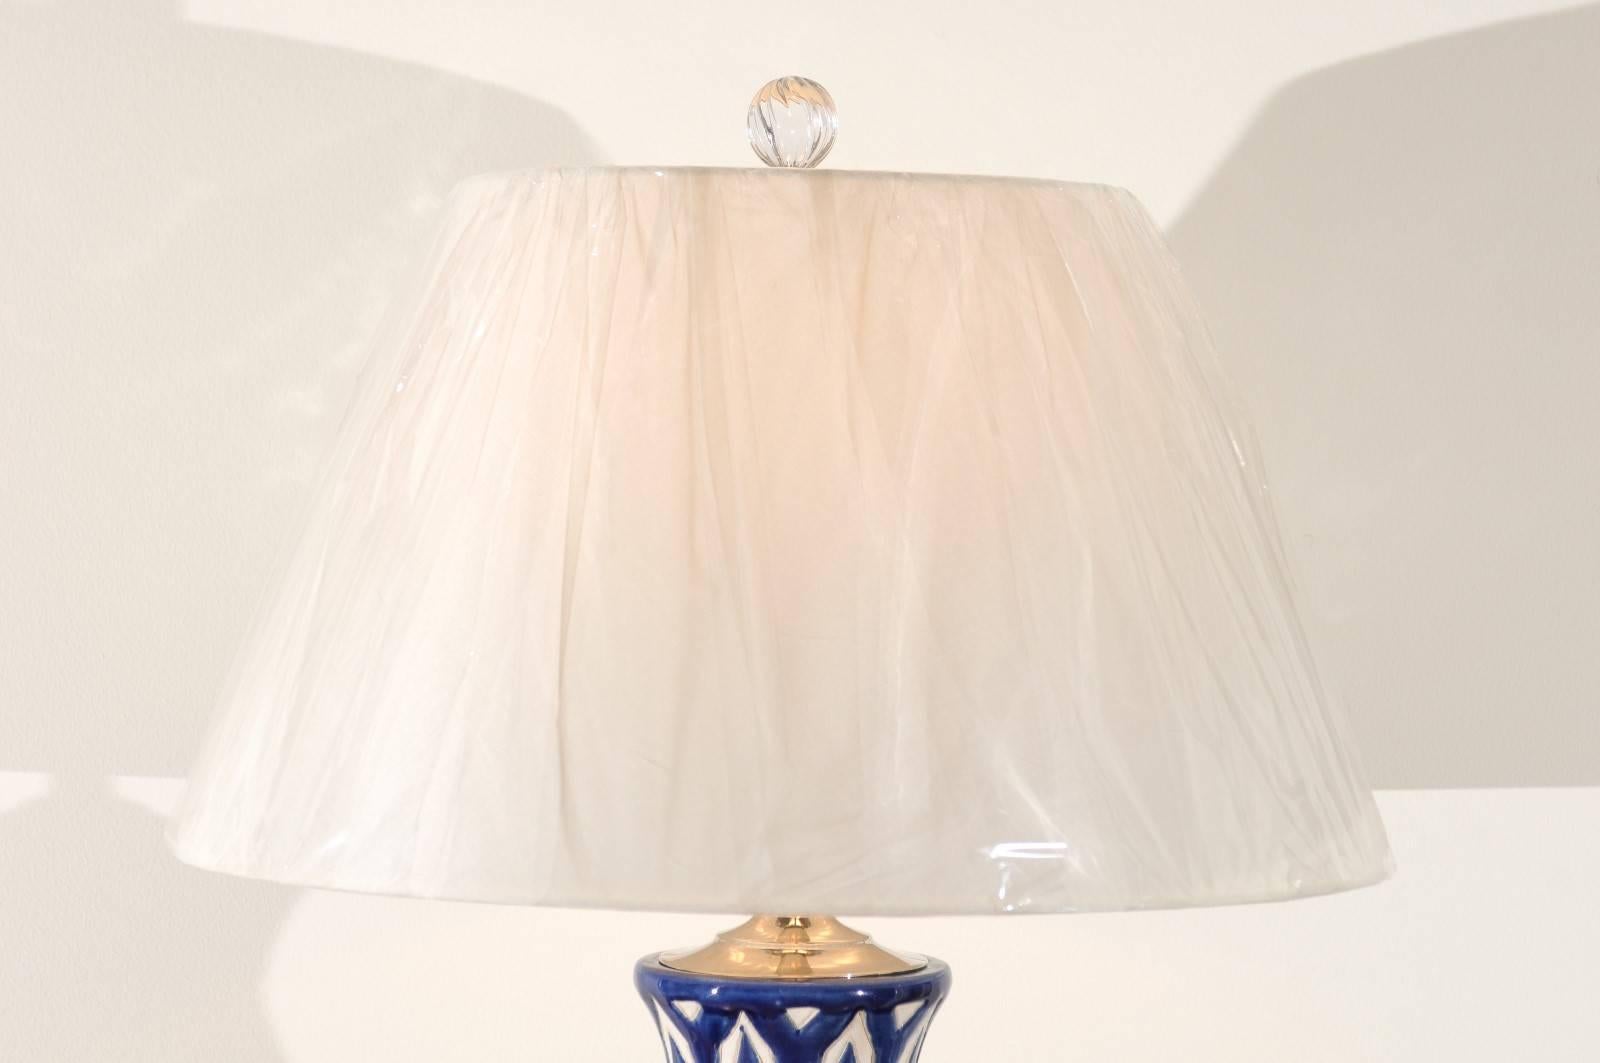 Striking Pair of Large-Scale Ceramic Lamps with Accents of Nickel and Lucite For Sale 3